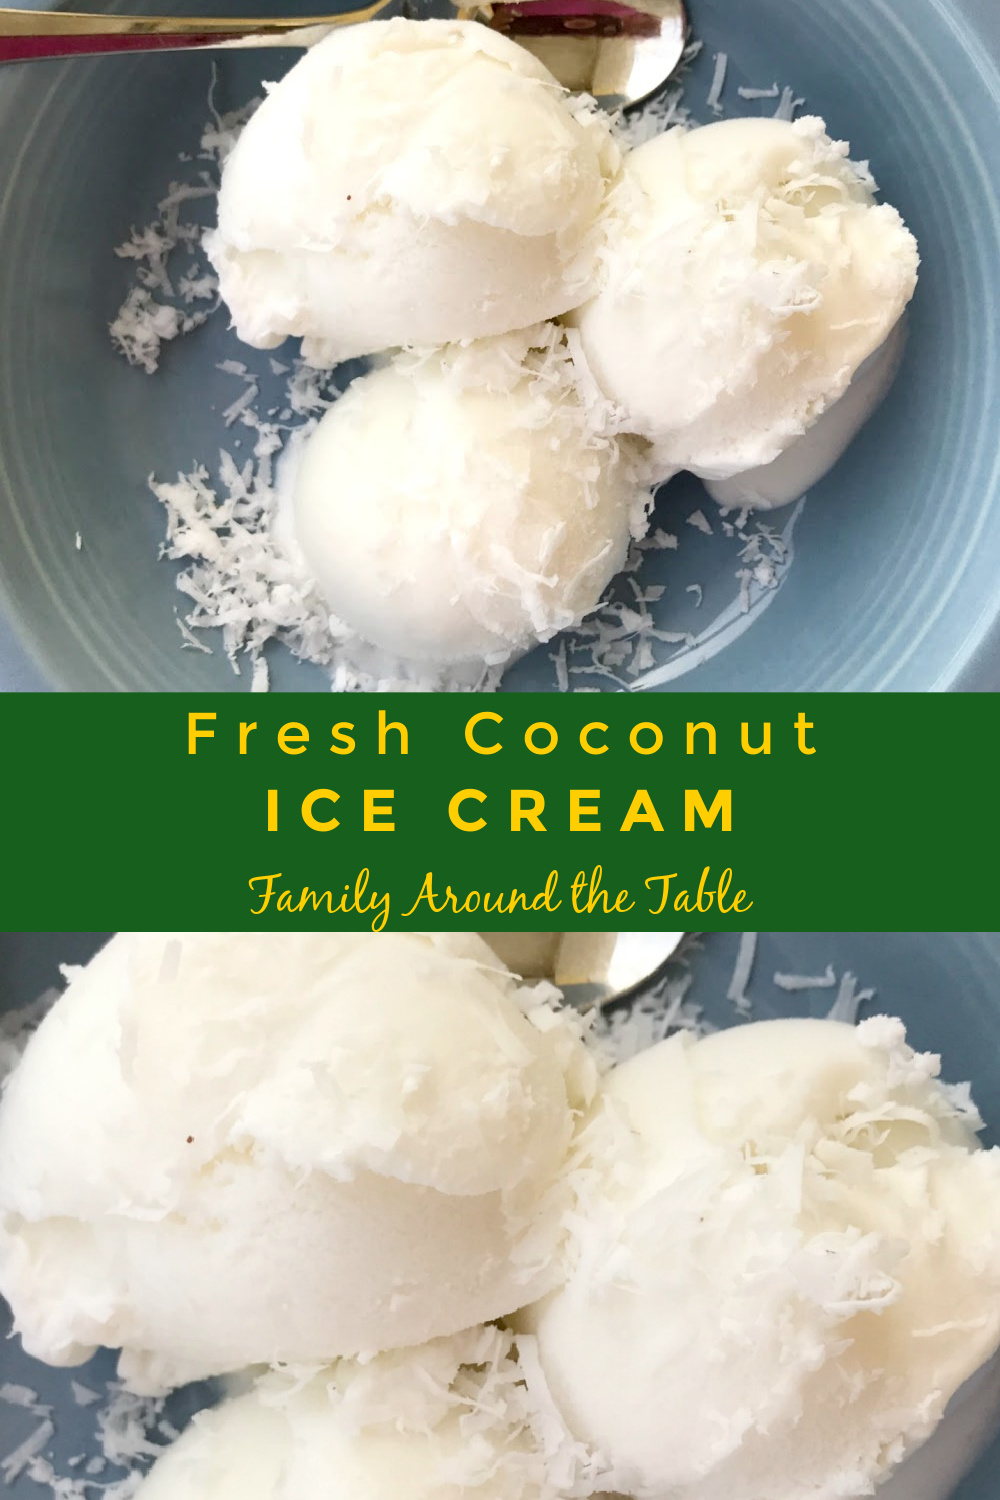 Fresh coconut ice cream can be made camp side with some cans or an ice cream ball.